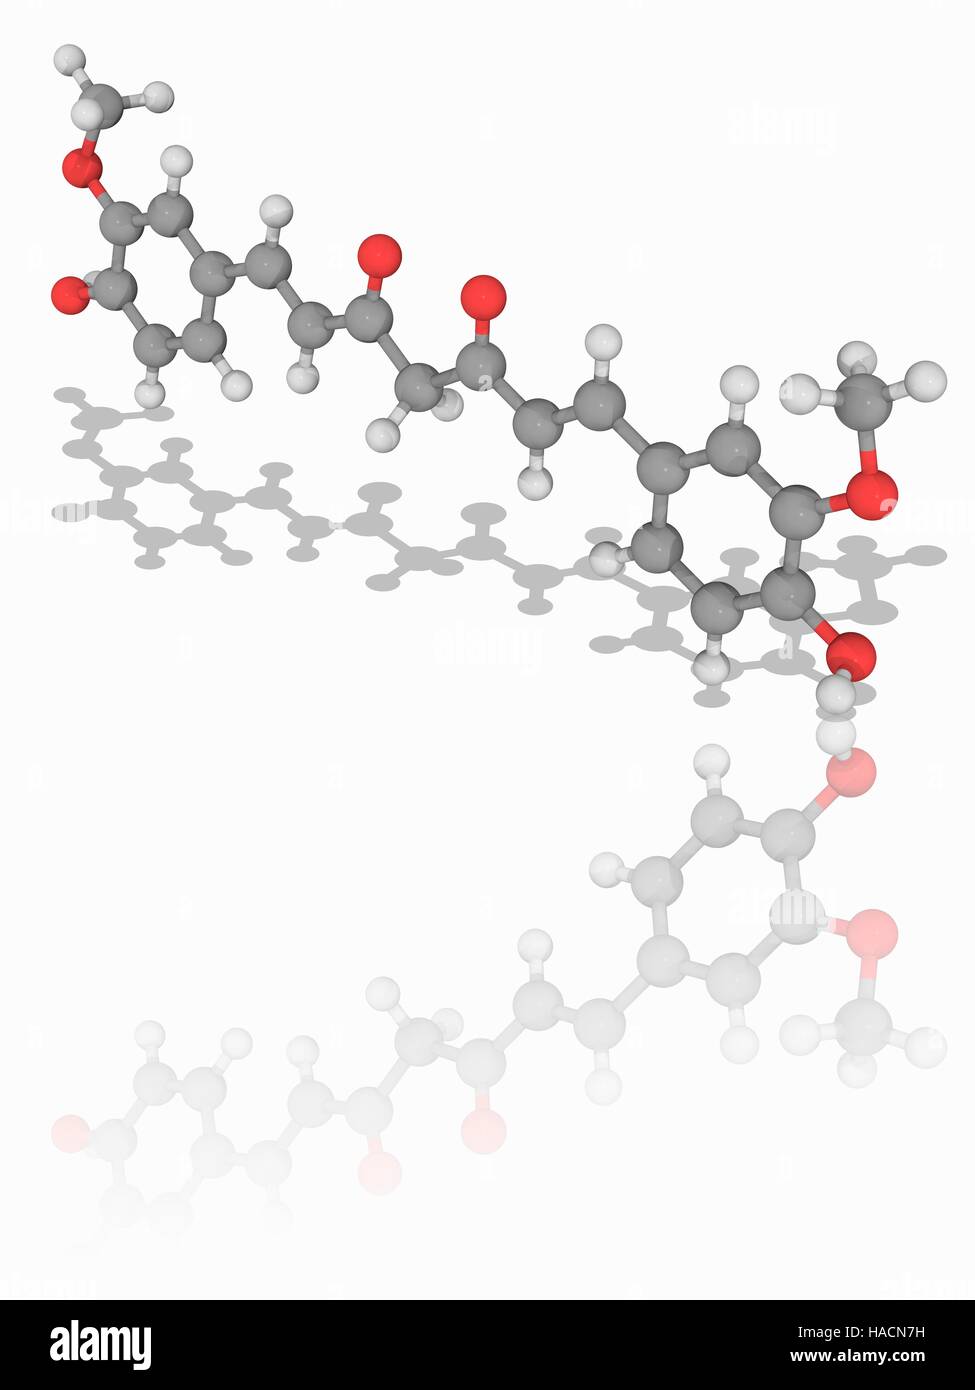 Curcumin. Molecular model of the food colouring and food additive curcumin (C21.H20.O6). This is the principal active ingredient of the Indian spice turmeric. Its E number is E100. Atoms are represented as spheres and are colour-coded: carbon (grey), hydrogen (white) and oxygen (red). Illustration. Stock Photo